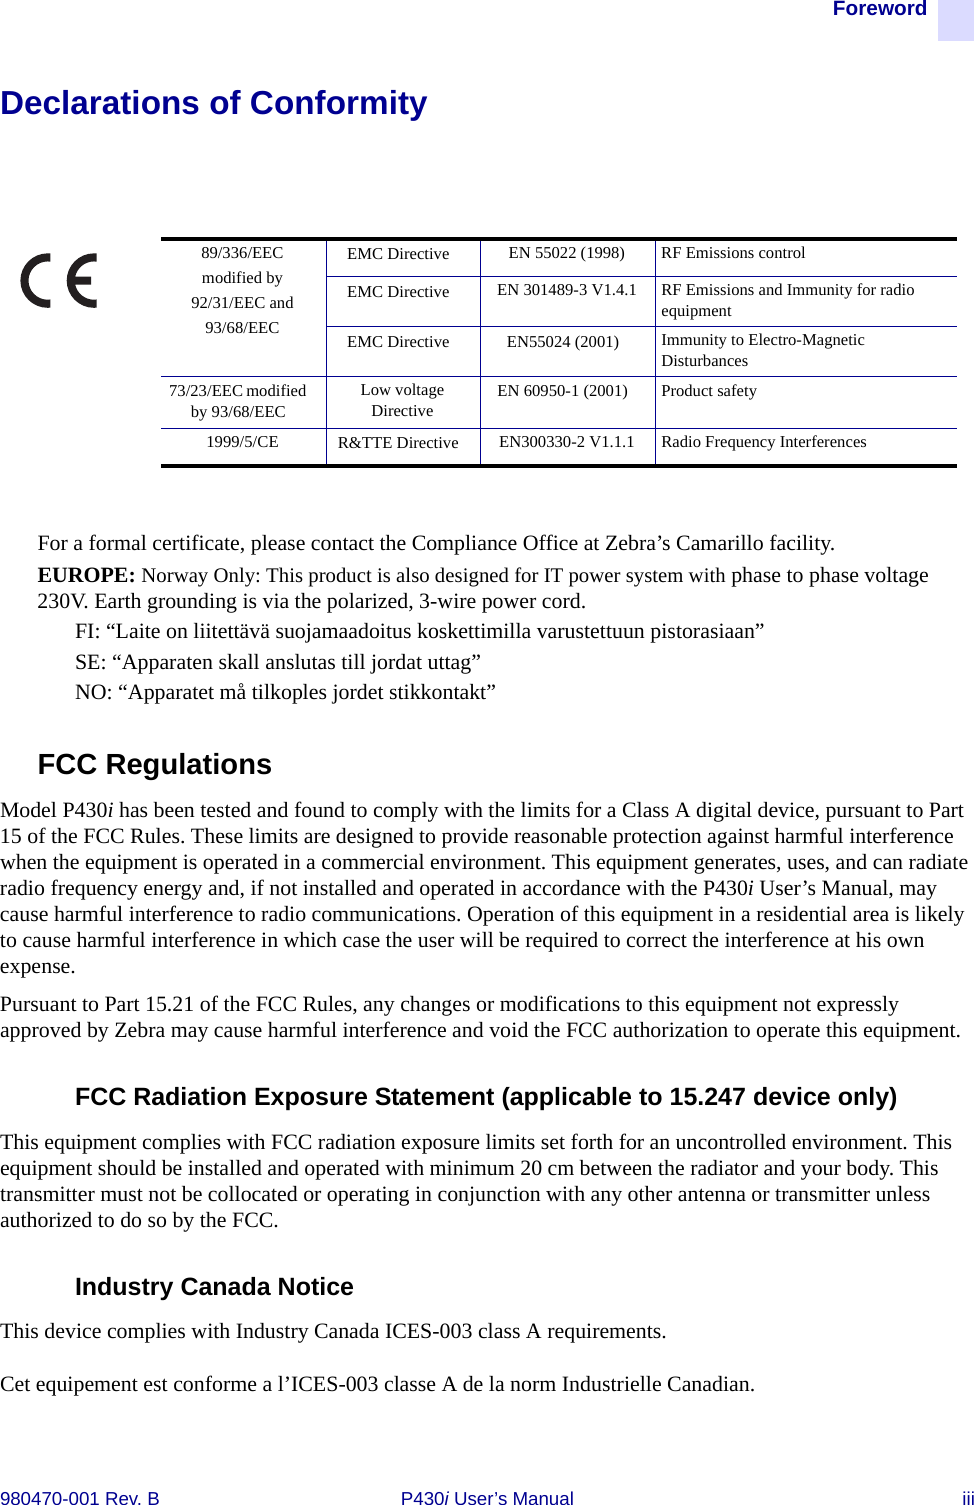 Foreword980470-001 Rev. B P430i User’s Manual iiiDeclarations of ConformityFor a formal certificate, please contact the Compliance Office at Zebra’s Camarillo facility.EUROPE: Norway Only: This product is also designed for IT power system with phase to phase voltage 230V. Earth grounding is via the polarized, 3-wire power cord.FI: “Laite on liitettävä suojamaadoitus koskettimilla varustettuun pistorasiaan”SE: “Apparaten skall anslutas till jordat uttag”NO: “Apparatet må tilkoples jordet stikkontakt”FCC RegulationsModel P430i has been tested and found to comply with the limits for a Class A digital device, pursuant to Part 15 of the FCC Rules. These limits are designed to provide reasonable protection against harmful interference when the equipment is operated in a commercial environment. This equipment generates, uses, and can radiate radio frequency energy and, if not installed and operated in accordance with the P430i User’s Manual, may cause harmful interference to radio communications. Operation of this equipment in a residential area is likely to cause harmful interference in which case the user will be required to correct the interference at his own expense.Pursuant to Part 15.21 of the FCC Rules, any changes or modifications to this equipment not expressly approved by Zebra may cause harmful interference and void the FCC authorization to operate this equipment.FCC Radiation Exposure Statement (applicable to 15.247 device only)This equipment complies with FCC radiation exposure limits set forth for an uncontrolled environment. This equipment should be installed and operated with minimum 20 cm between the radiator and your body. This transmitter must not be collocated or operating in conjunction with any other antenna or transmitter unless authorized to do so by the FCC.Industry Canada NoticeThis device complies with Industry Canada ICES-003 class A requirements.Cet equipement est conforme a l’ICES-003 classe A de la norm Industrielle Canadian.89/336/EECmodified by92/31/EEC and93/68/EECEMC Directive EN 55022 (1998) RF Emissions controlEMC Directive EN 301489-3 V1.4.1 RF Emissions and Immunity for radio equipmentEMC Directive EN55024 (2001) Immunity to Electro-Magnetic Disturbances73/23/EEC modified by 93/68/EECLow voltage Directive EN 60950-1 (2001) Product safety1999/5/CE R&amp;TTE Directive EN300330-2 V1.1.1 Radio Frequency Interferences